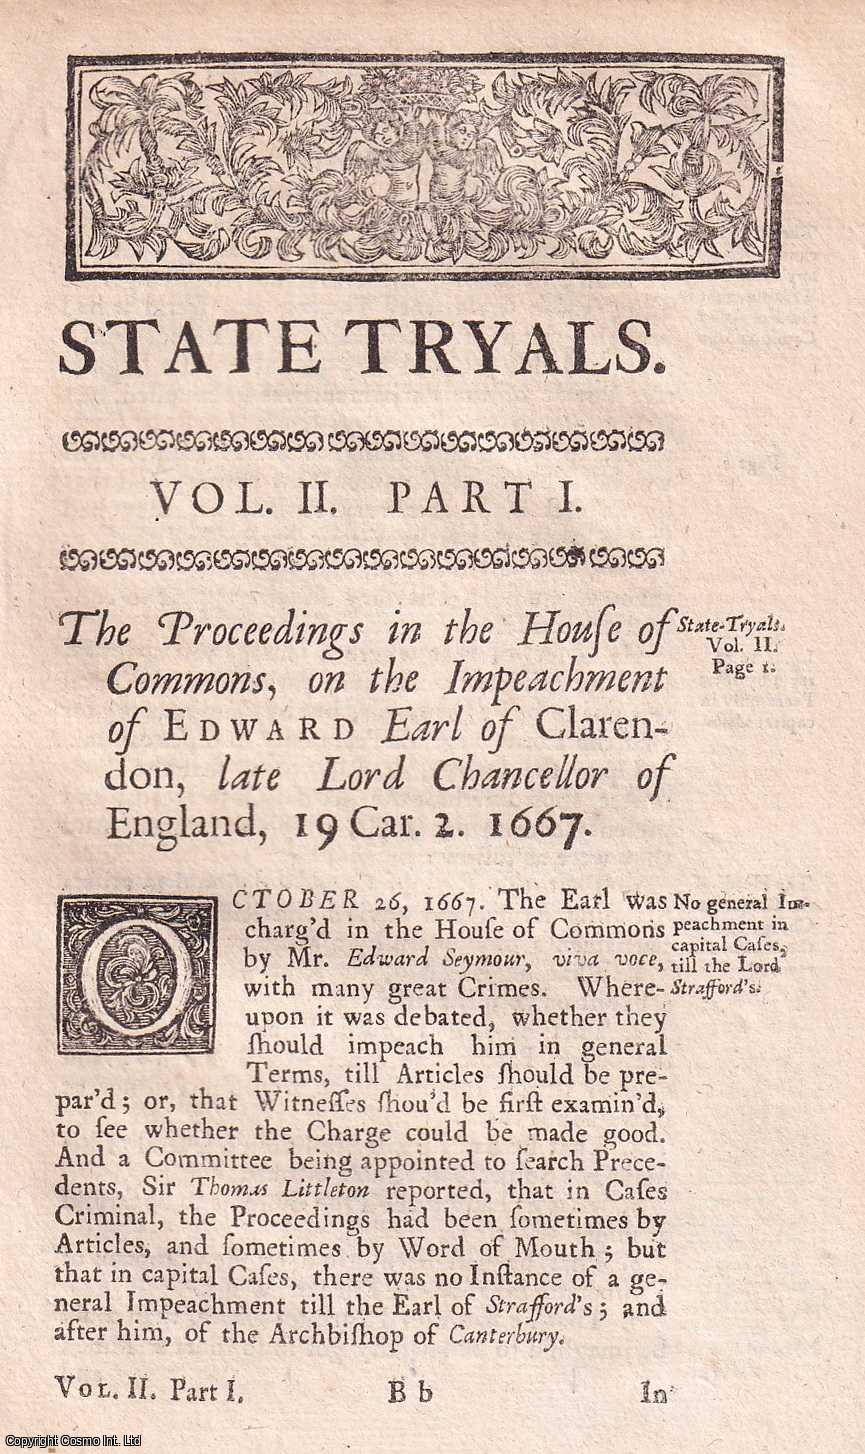 [Trial] - Proceedings Against The Earl of Clarendon, A.D. 1667, Upon an Impeachment of High Treason and High Misdemeanors. An original report from the collected Tryals for High Treason, and Other Crimes, 1720.